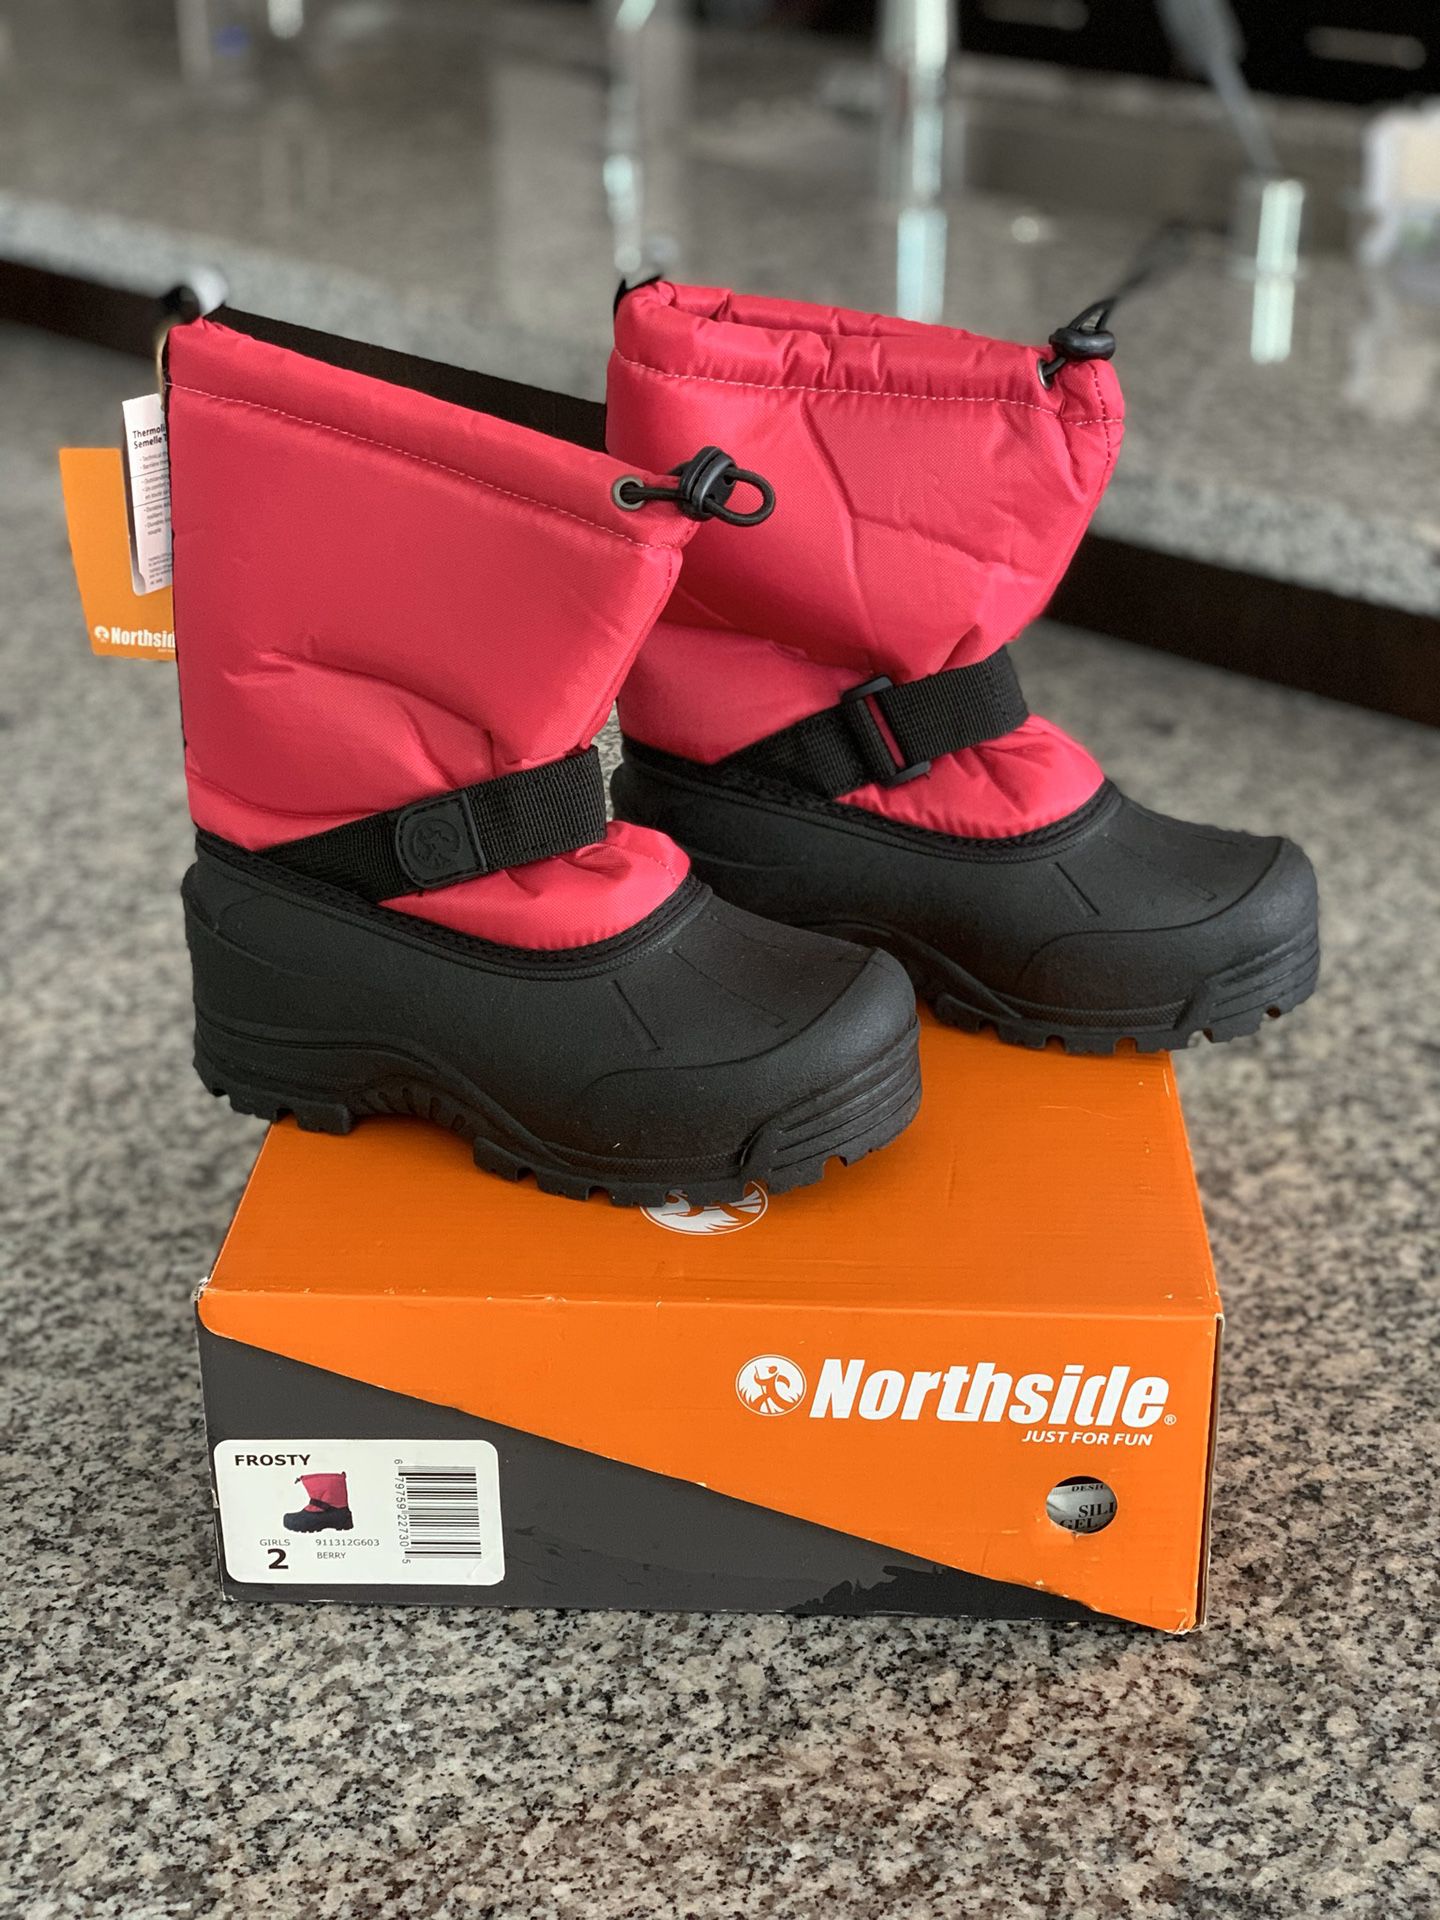 *BRAND NEW* Girls Snow Boots (Size: 2 Big Girl, not Toddler size)